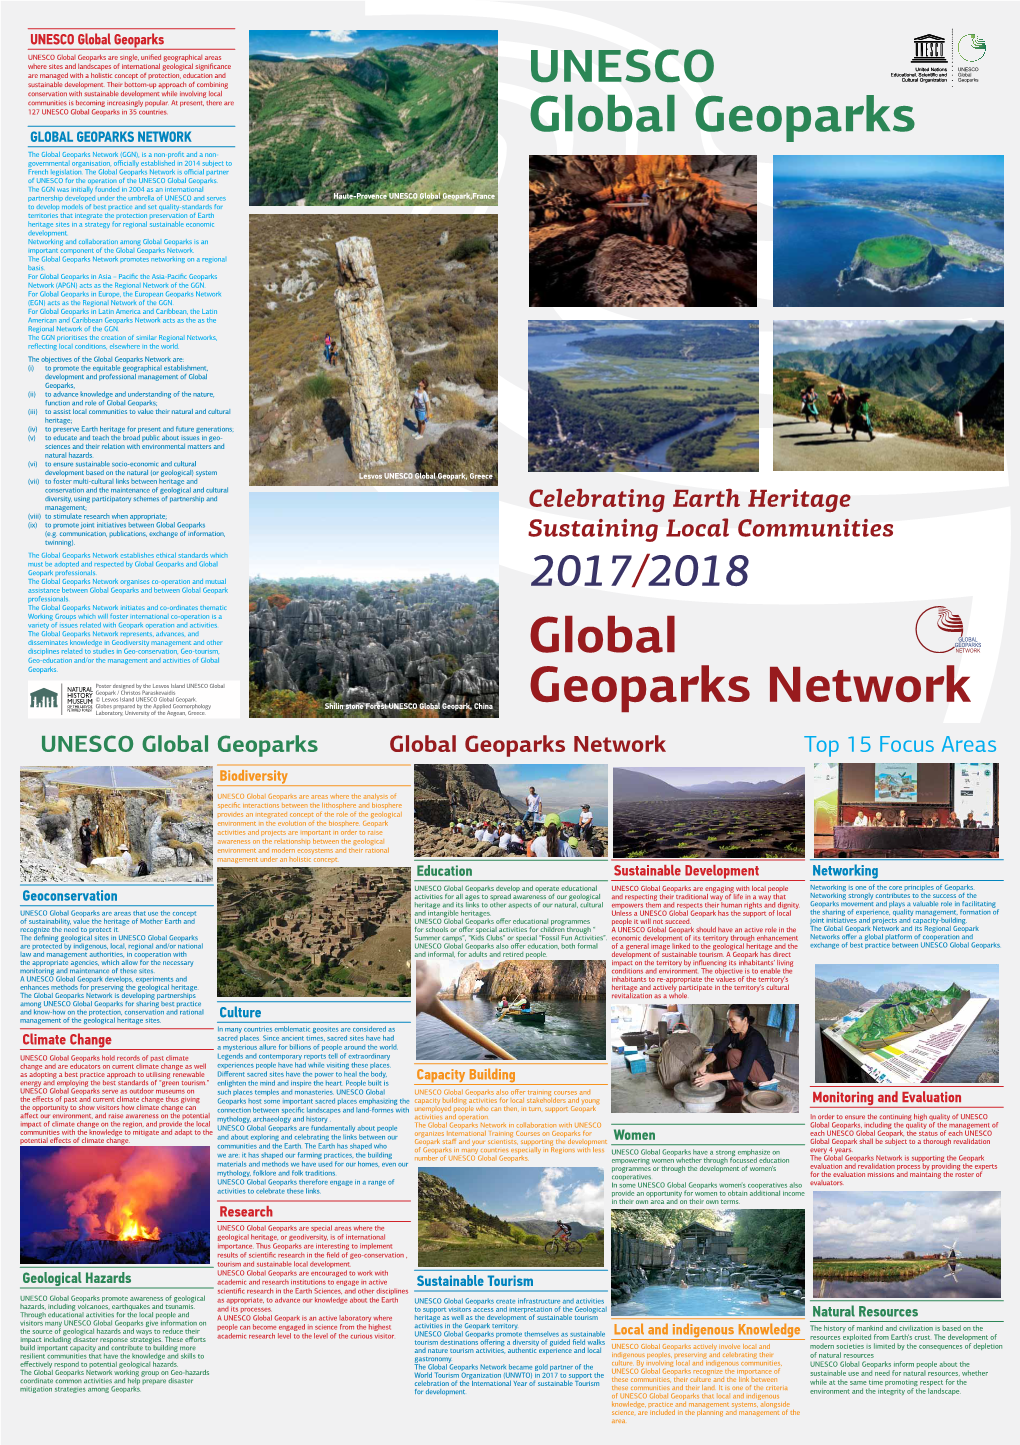 UNESCO Global Geoparks UNESCO Global Geoparks Are Single, Unified Geographical Areas